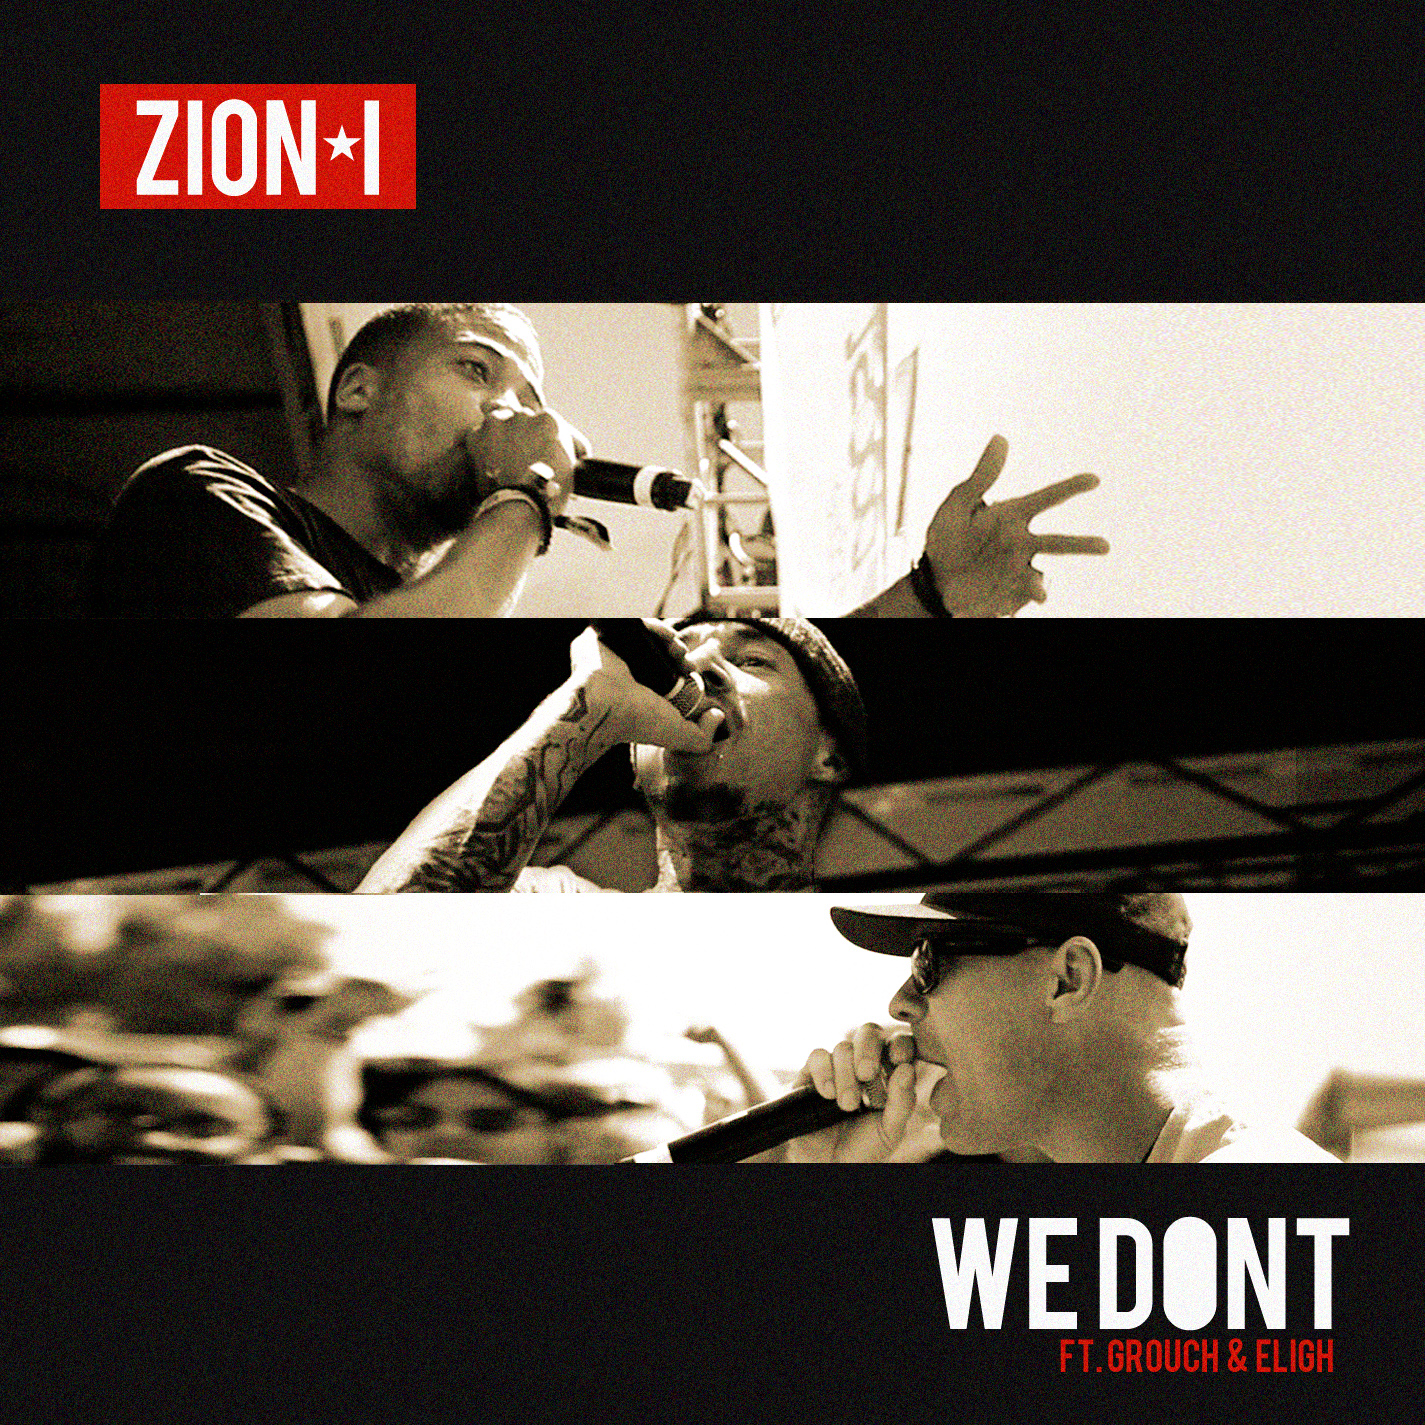 Zion I - "We Don't" ft. The Grouch & Eligh (Produced by Amp Live & Timeline)